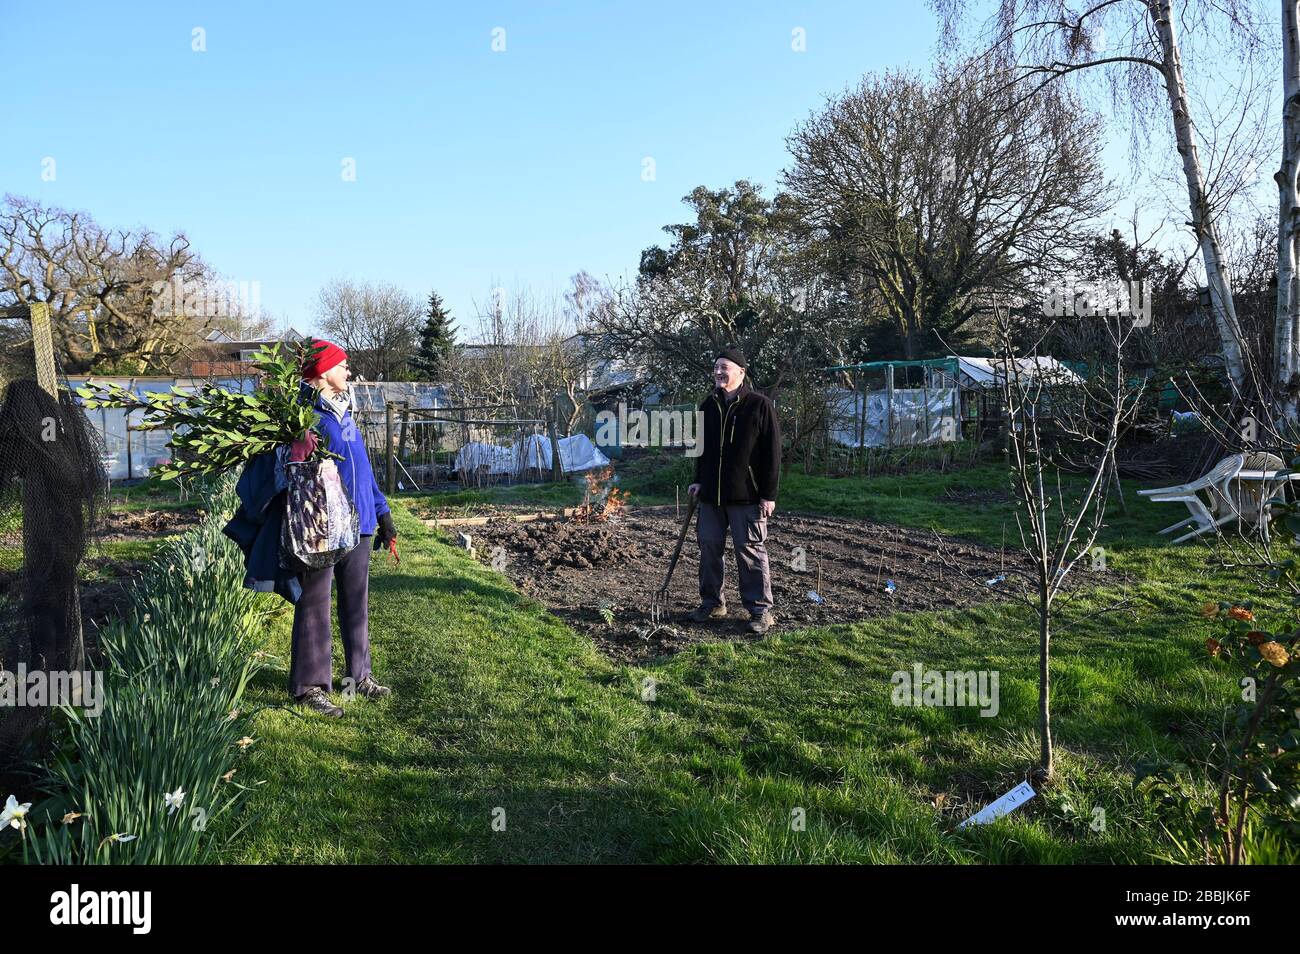 Observing social distancing as one allotment gardener greets another in passing at an allotment garden in London. Stock Photo